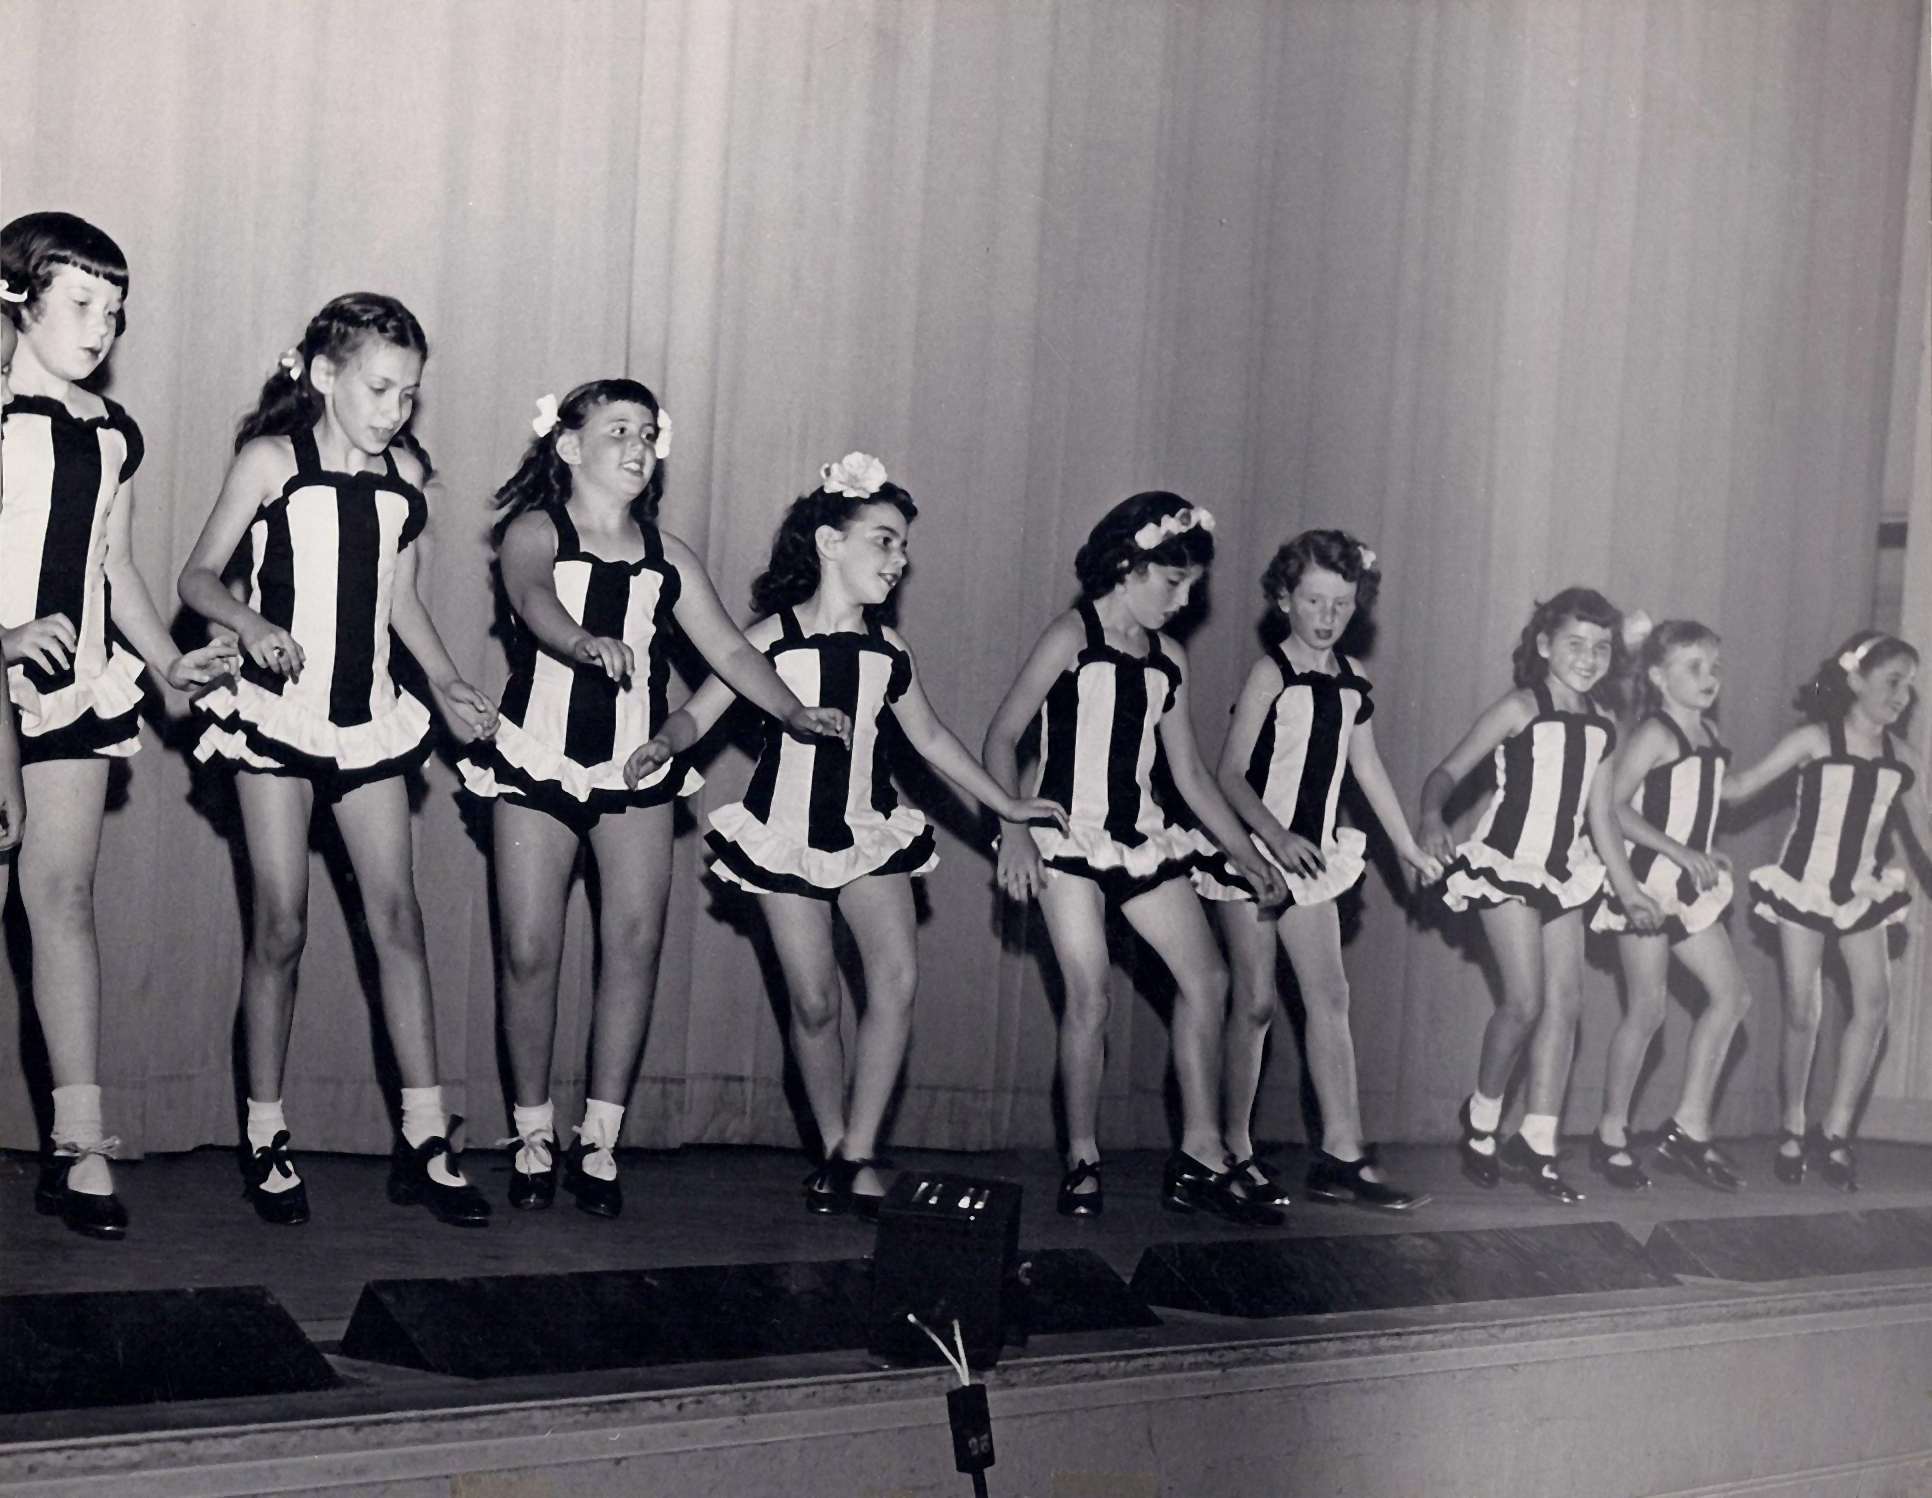 Bonnie (4th from left) in an early dance recital